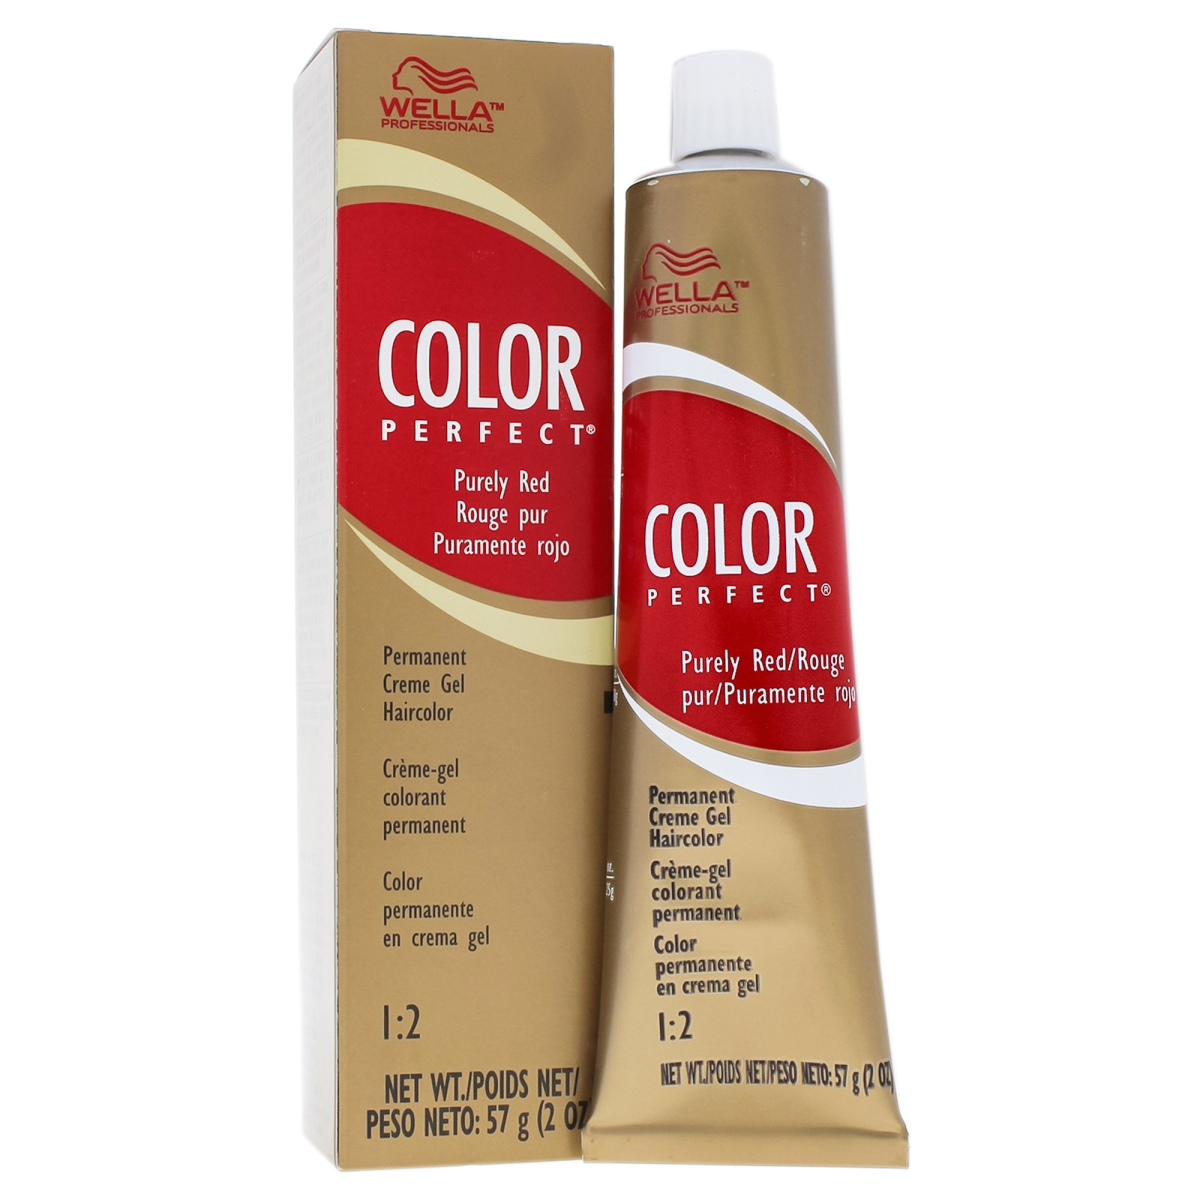 I0086465 Color Perfect Permanent Creme Gel Hair Color For Unisex - 5 Rr Level 5 Pure Red - 2 Oz